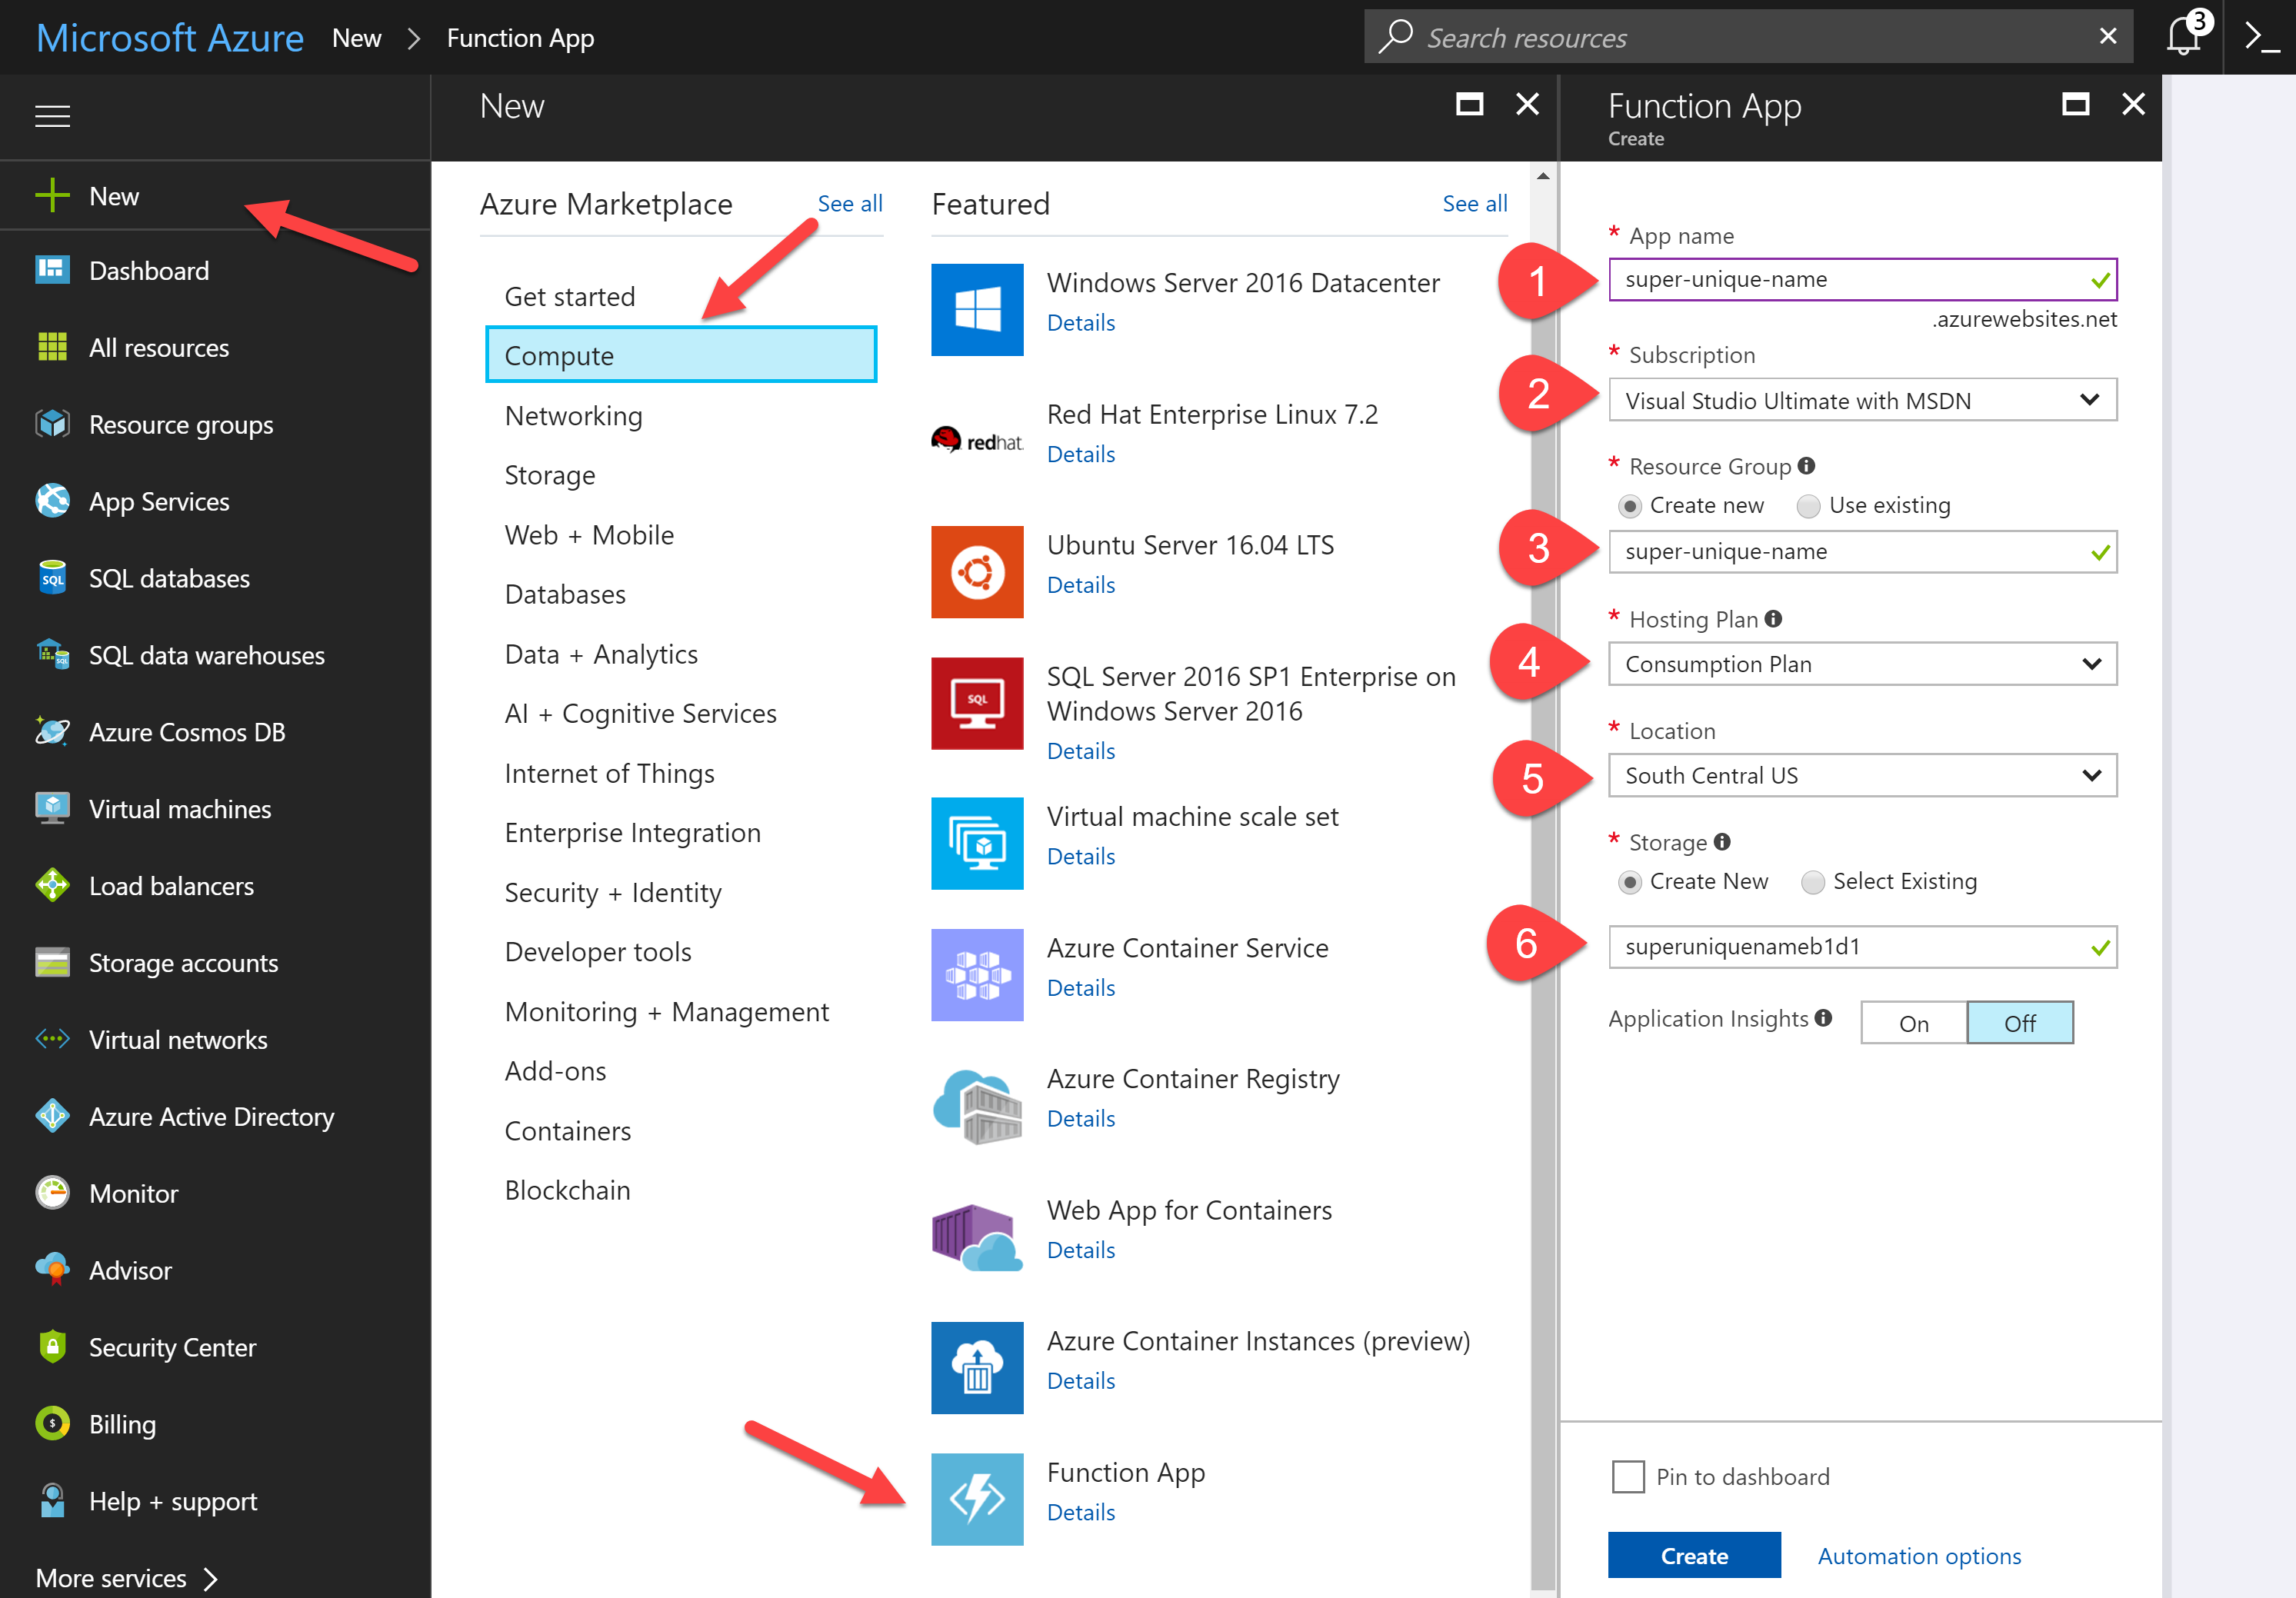 Figure 1: Creating a new Function App in the Azure Portal